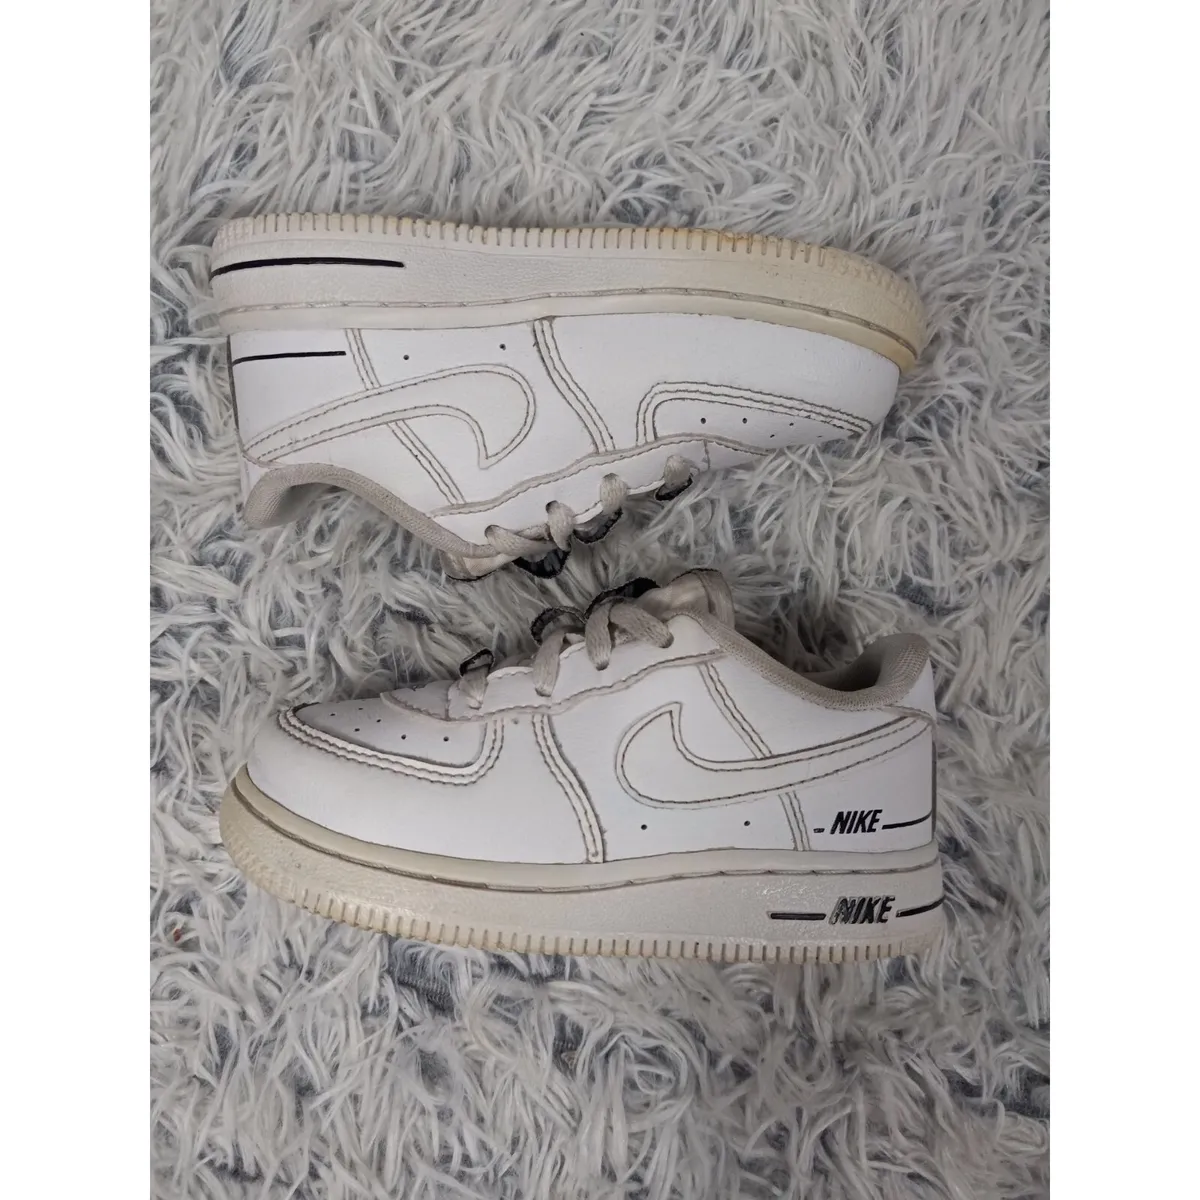 Nike Air Force 1 Lvl8 Td Kids 8c White Low Top Athletic Sneakers Shoes